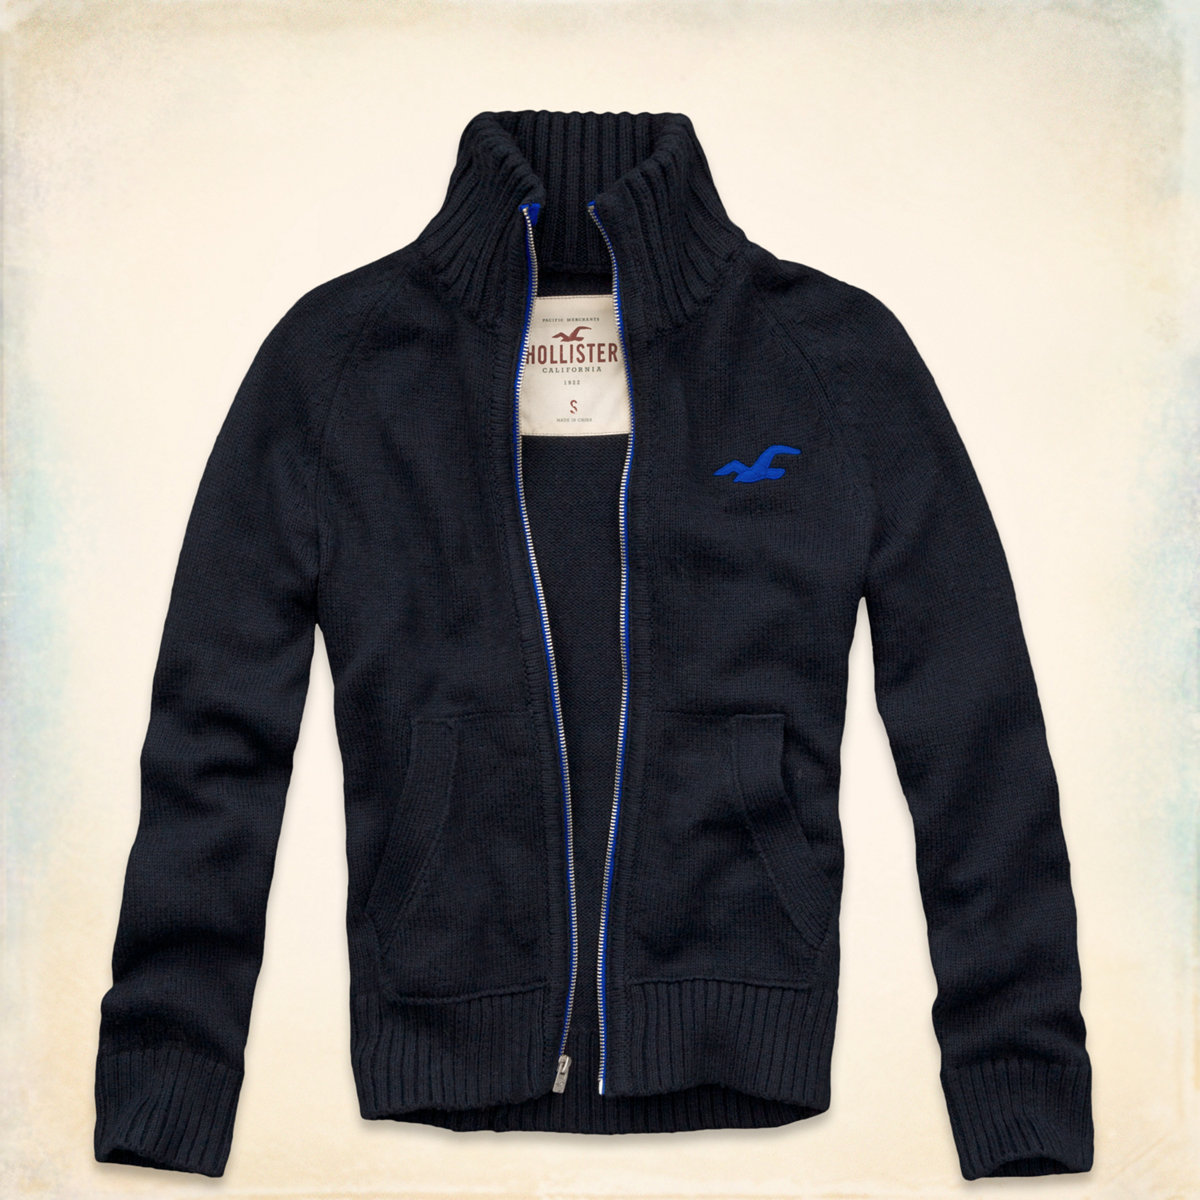 Hollister Canada Deals: Get Select Hoodies and Sweaters for Men for Only $10.50 + Free Shipping ...